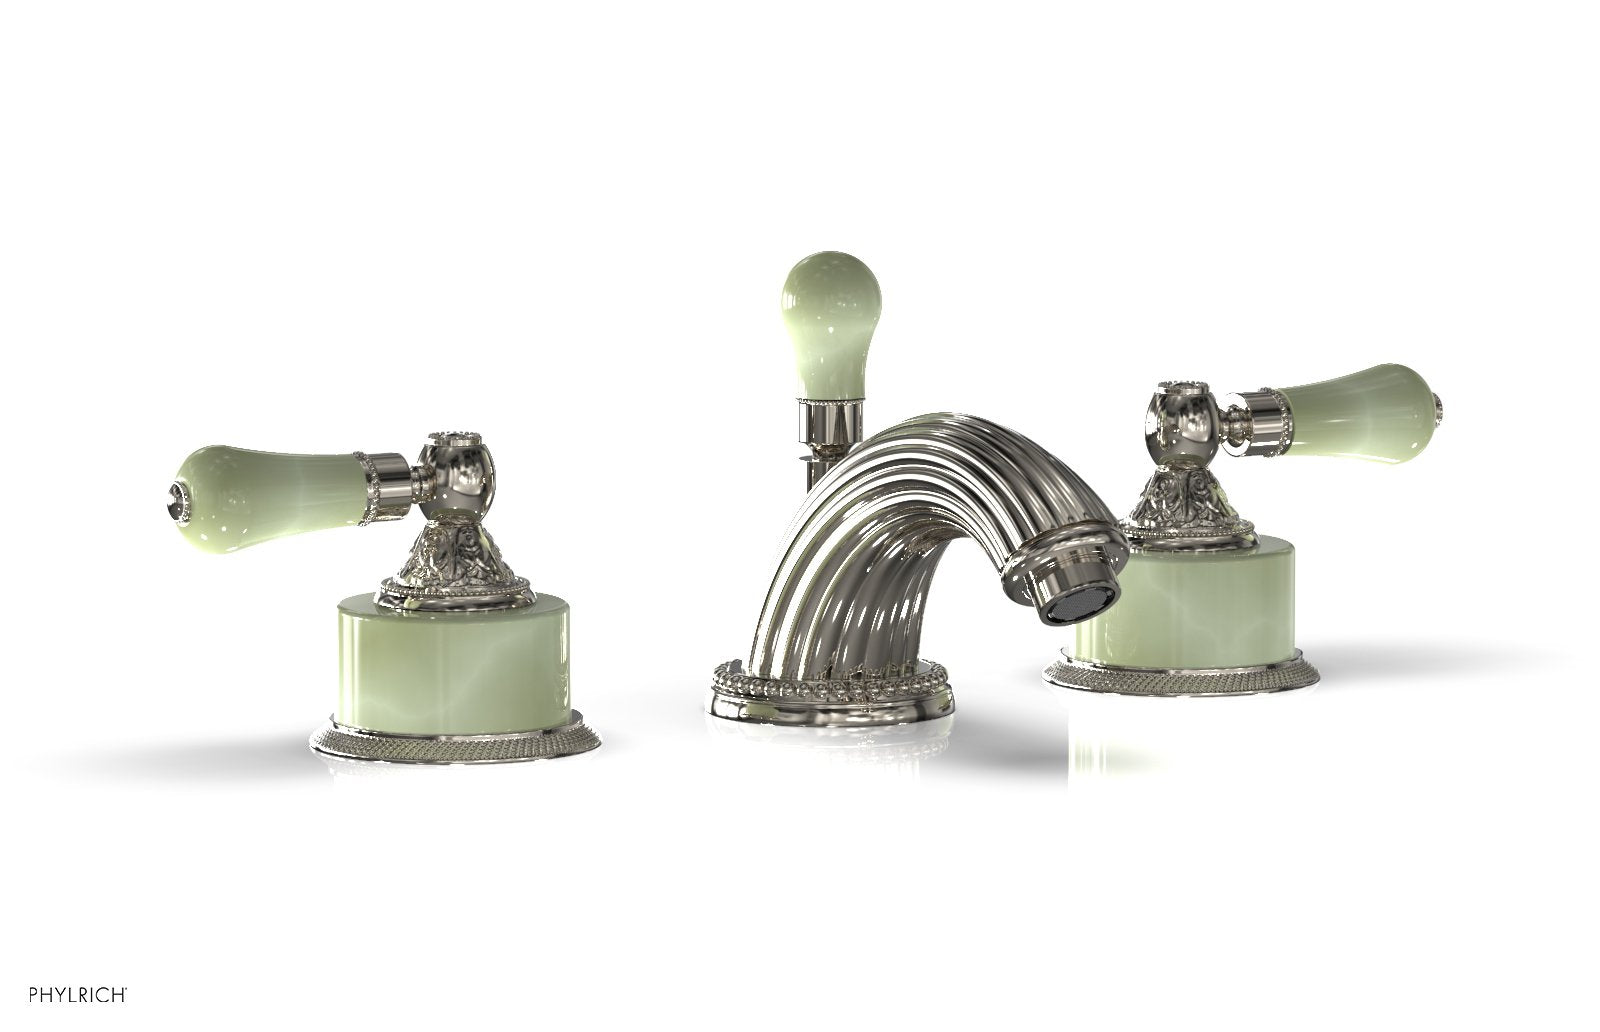 Phylrich VERSAILLES Widespread Faucet - Green Onyx